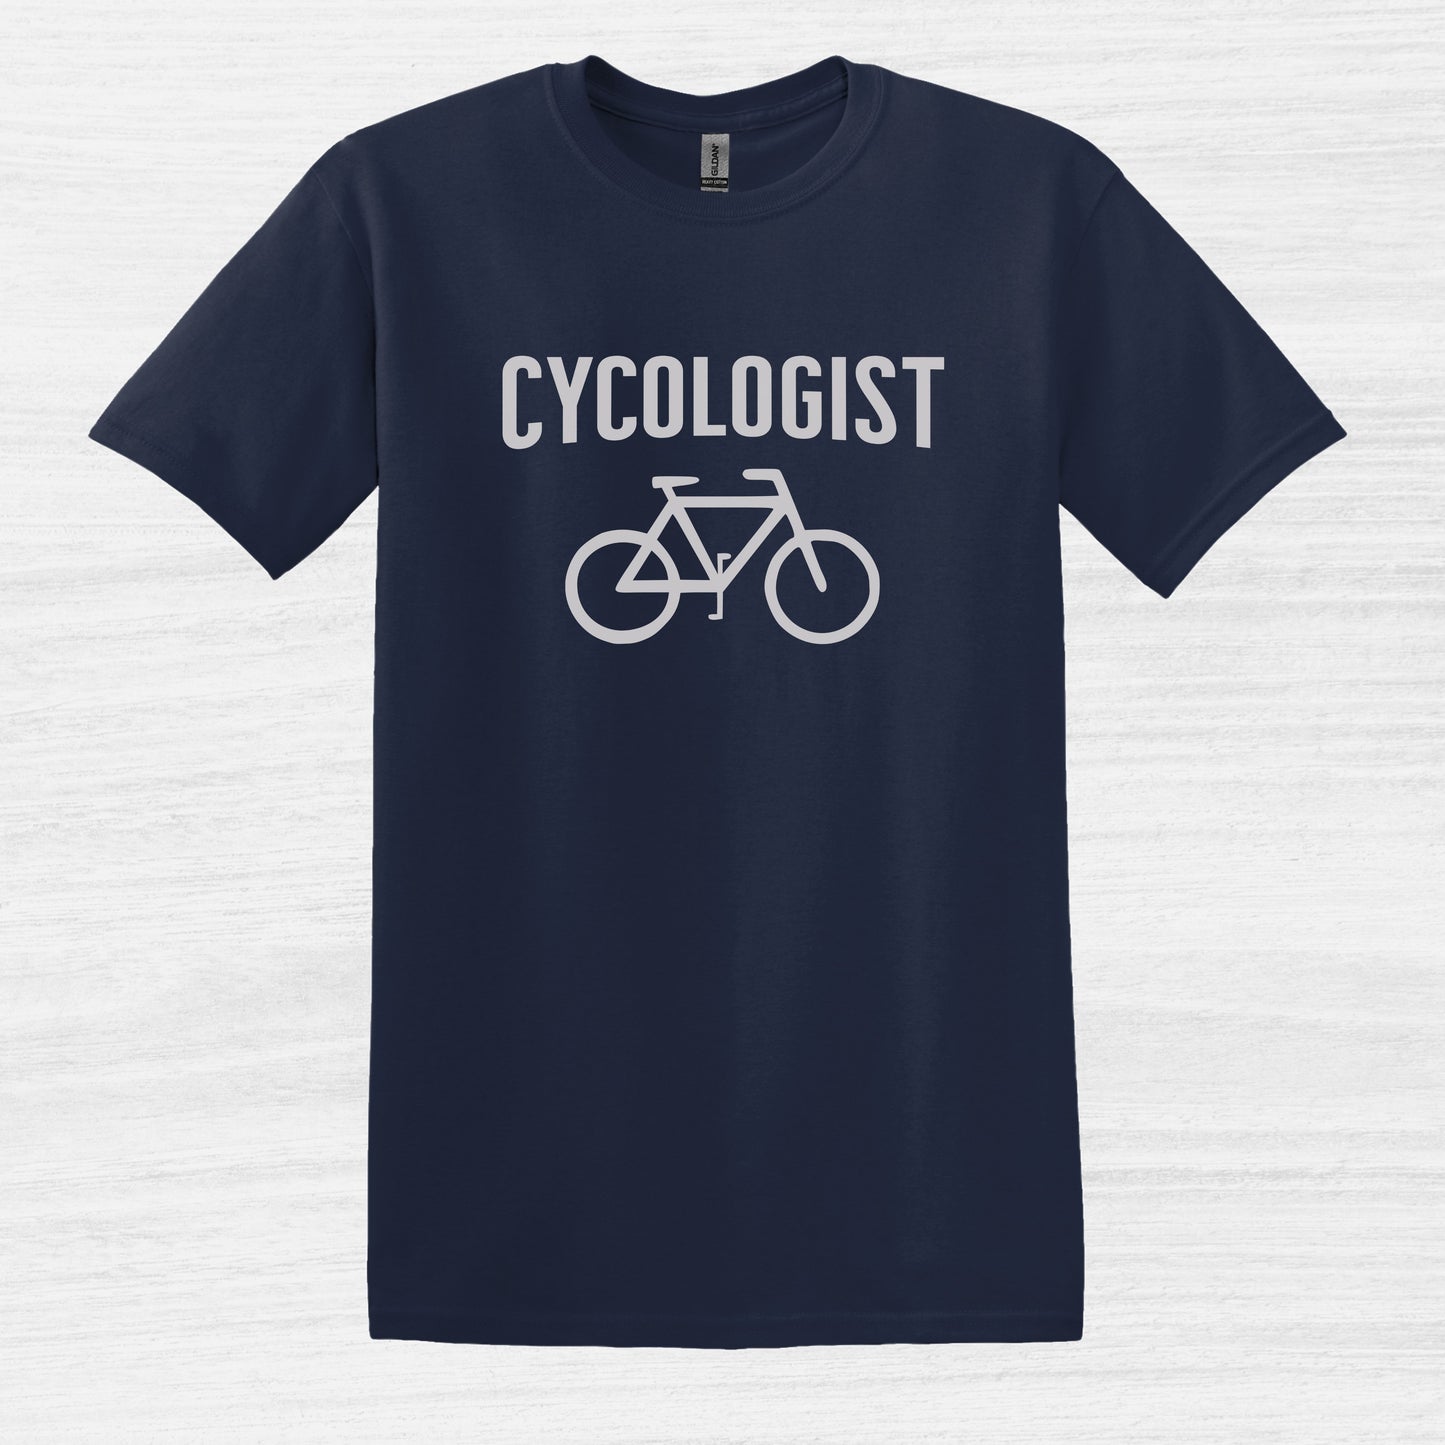 Bike Bliss Cycologist and Bike T-Shirt for Men Navy 2